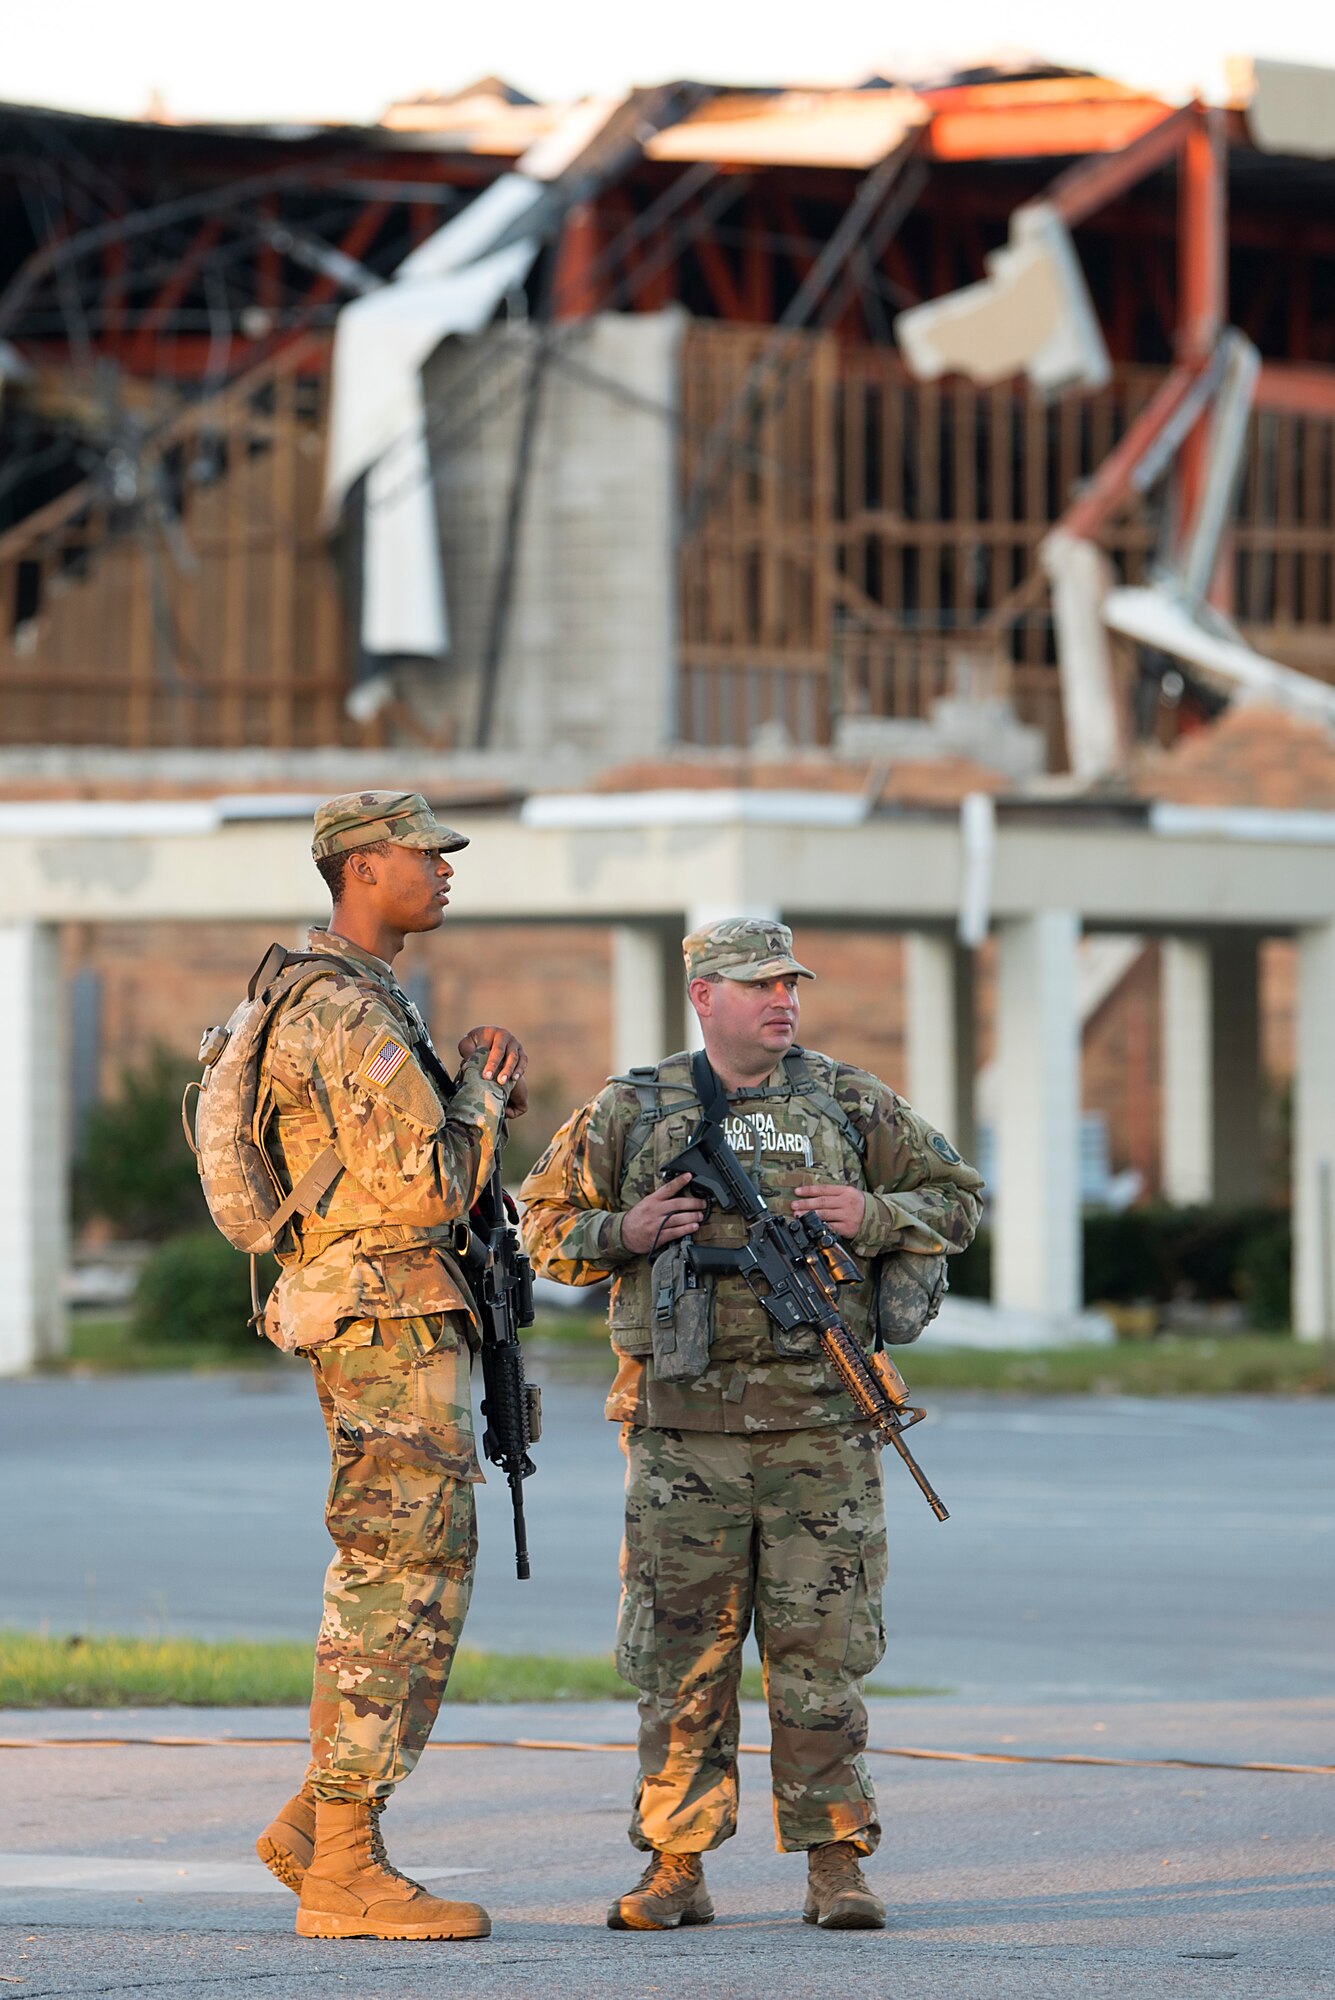 53rd Infantry Brigade Combat Team soldiers provide security for the 290th Joint Communications Support Squadron in Panama City, Fla., Oct. 13, 2018. The 290th JCSS from MacDill Air Force Base established initial communications for the Bay County Emergency Operations Center to enable Total Force relief efforts following Hurricane Michael. (U.S. Air Force photo by Airman 1st Class Caleb Nunez)